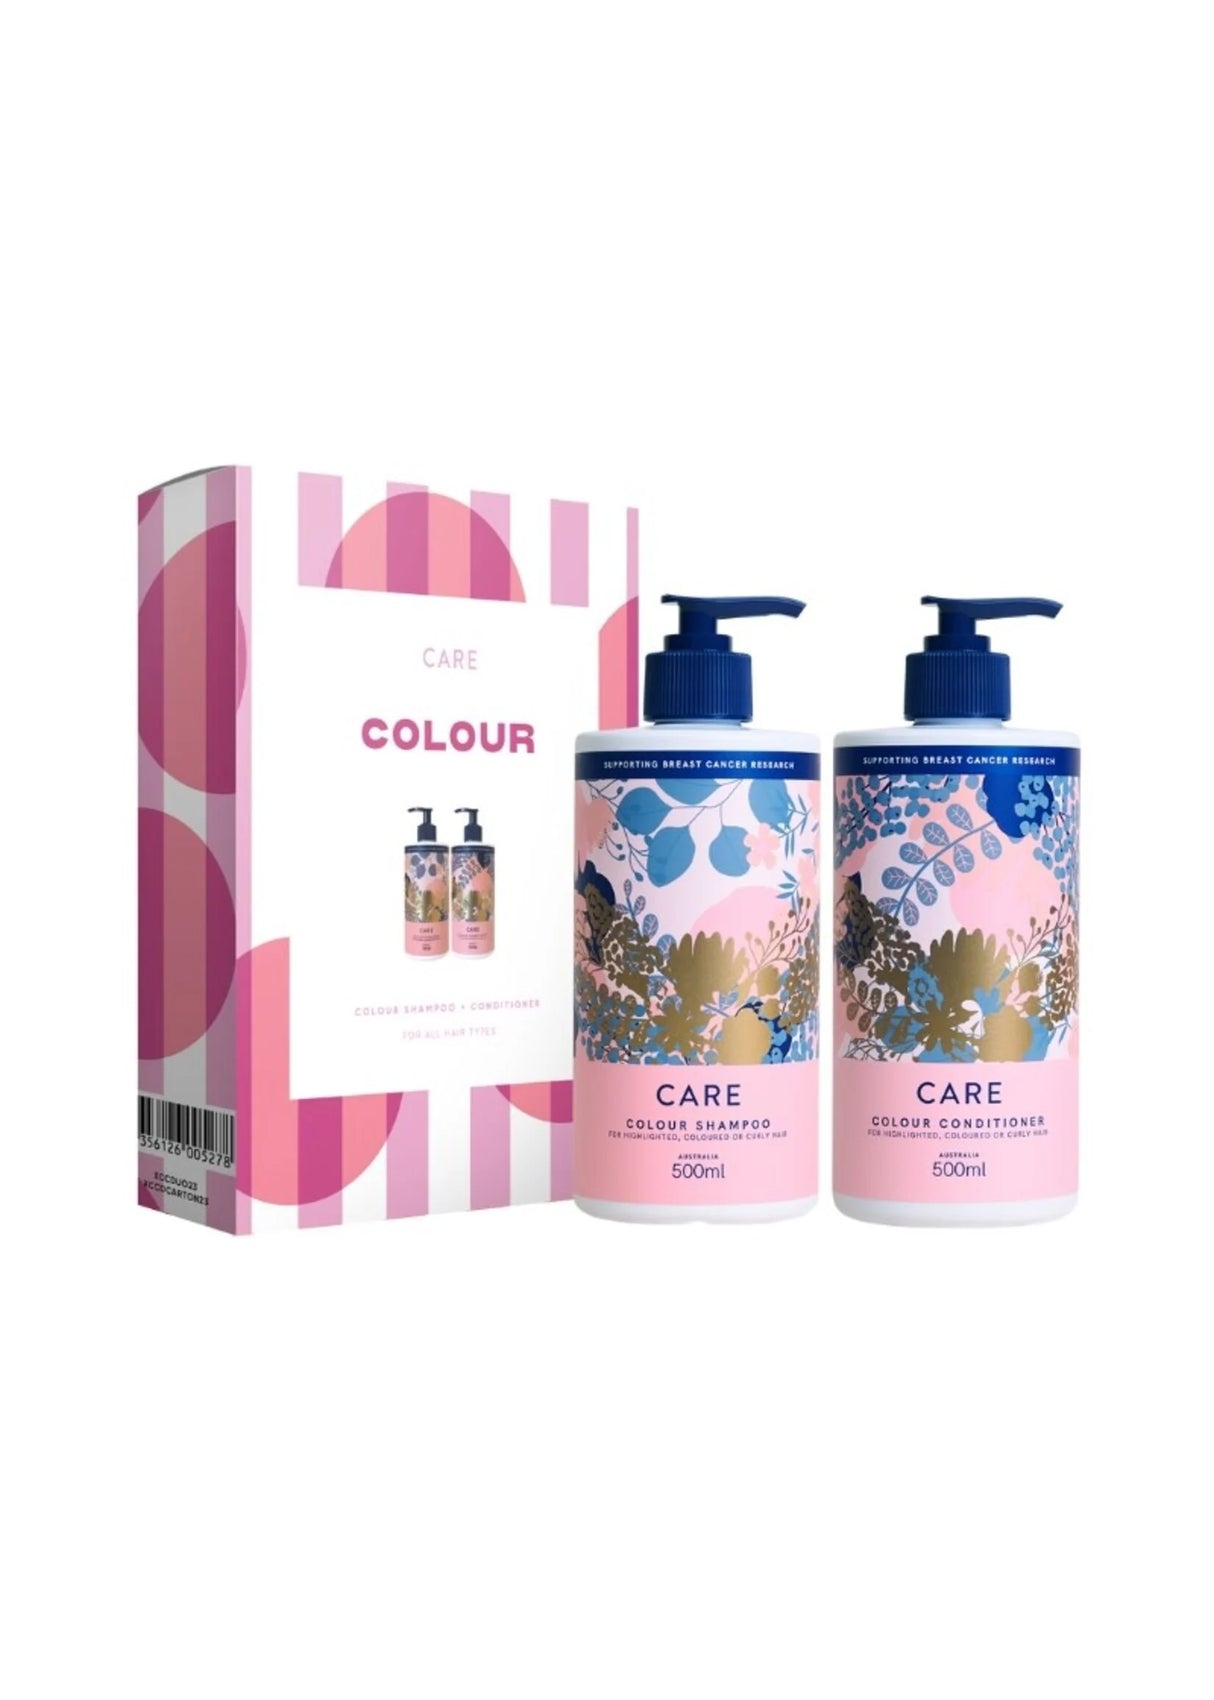 Nak Hair Care Colour Shampoo and Conditioner 500ml Bundle